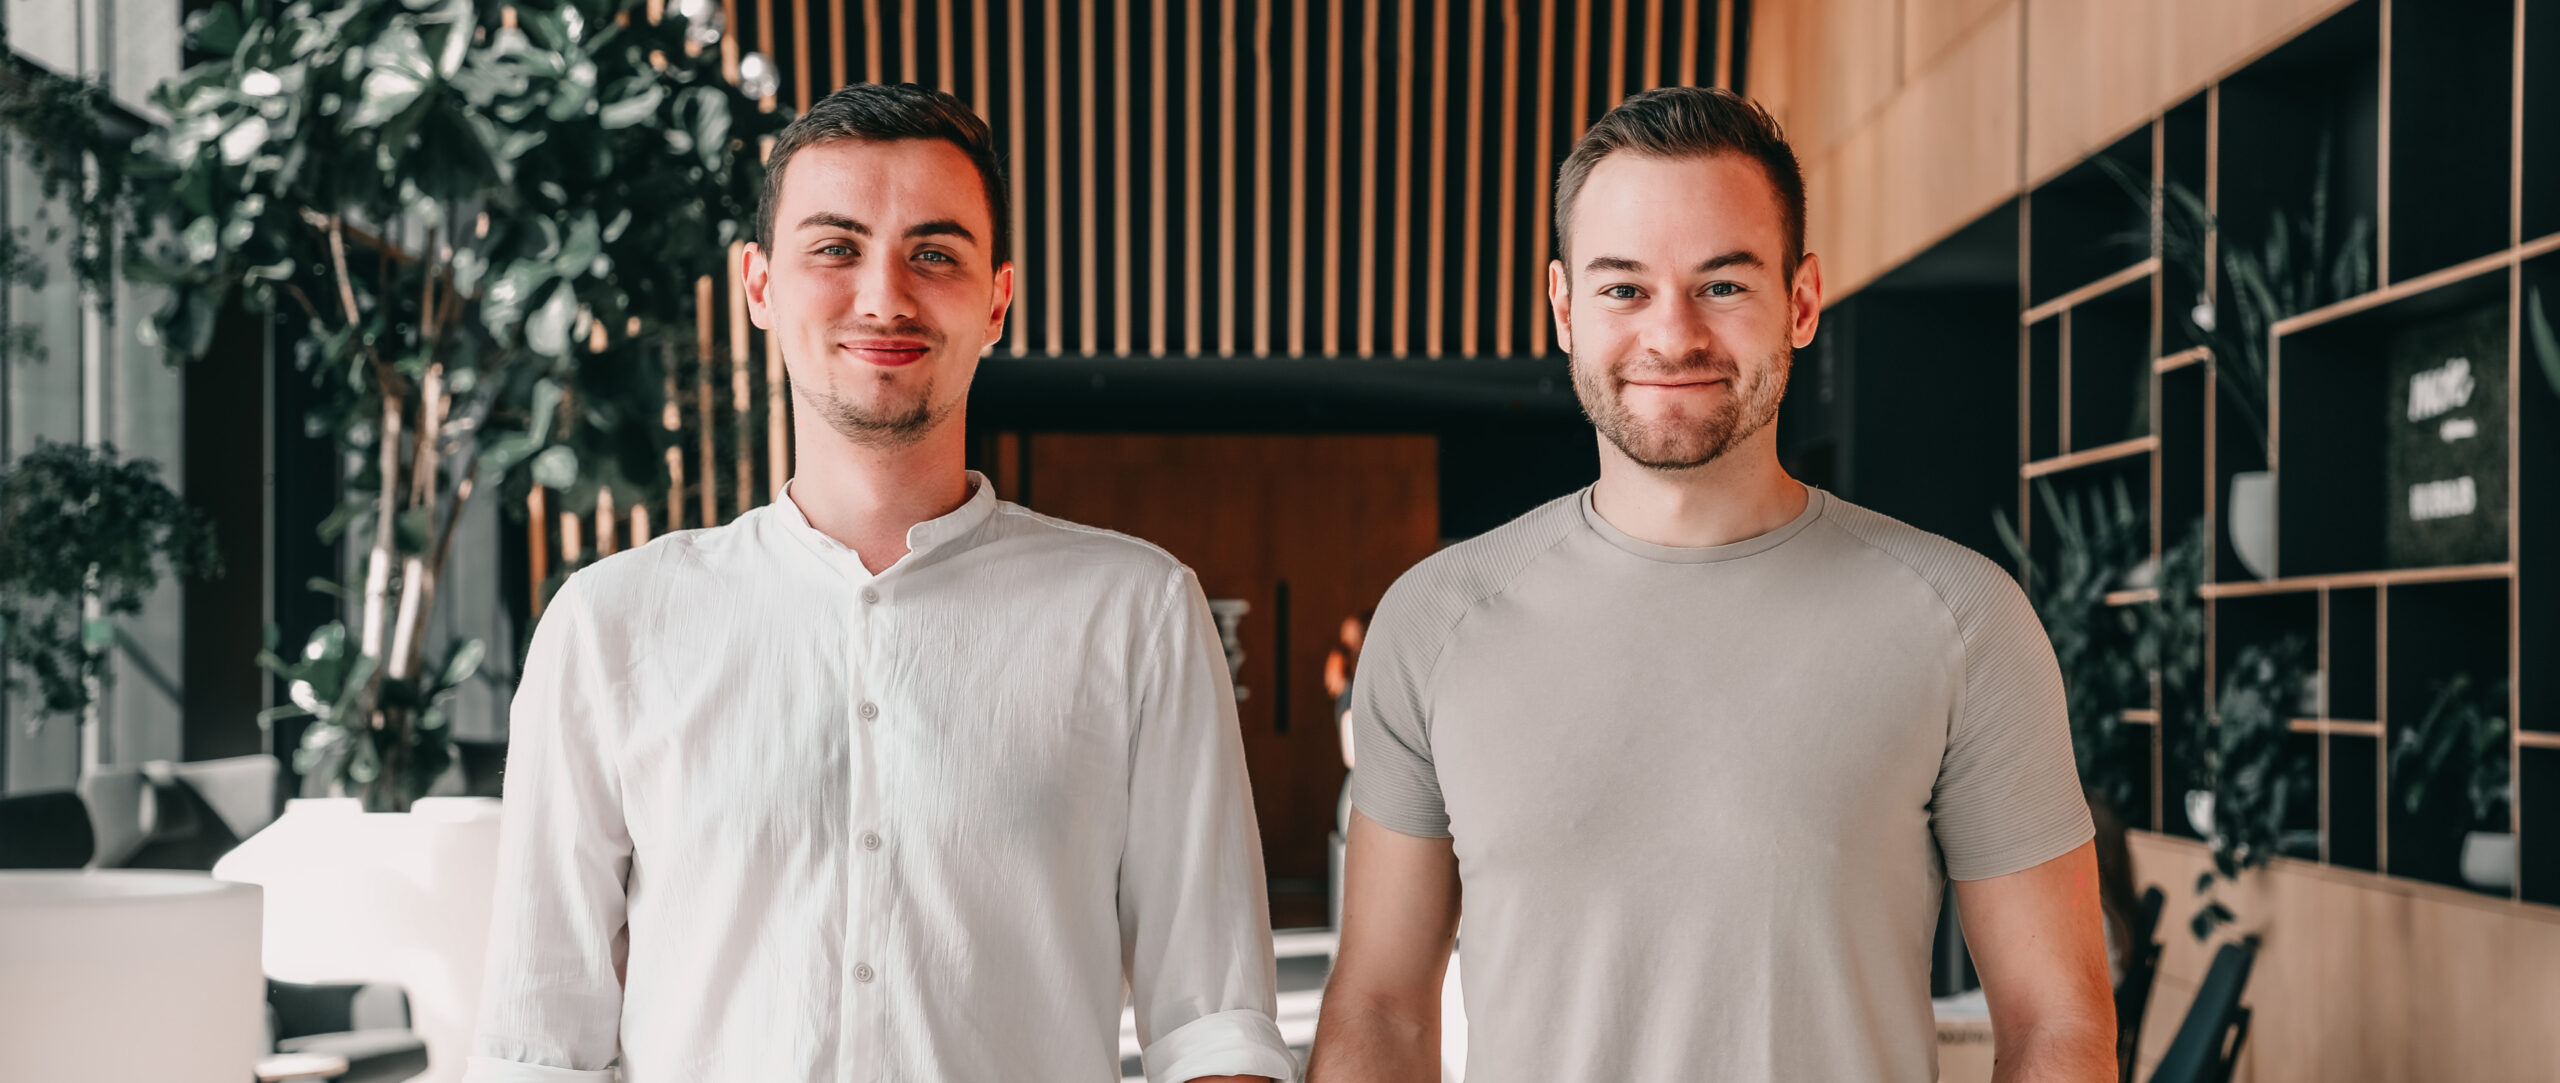 Building a Career in Tech: Lessons from Stano and Martin at GoHealth Slovakia